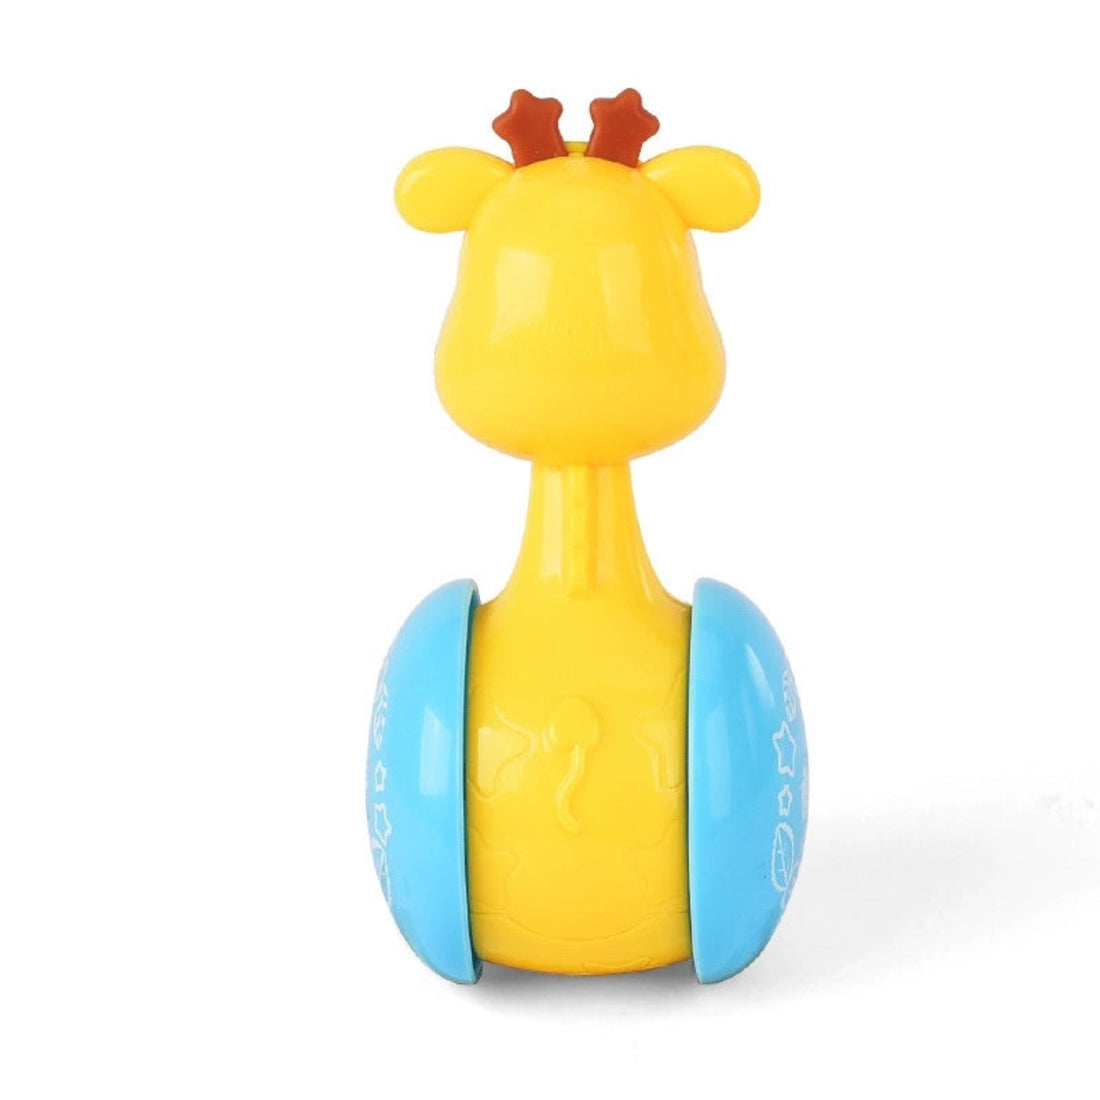 Non-toxic Deer Little Star Bell Baby Toy